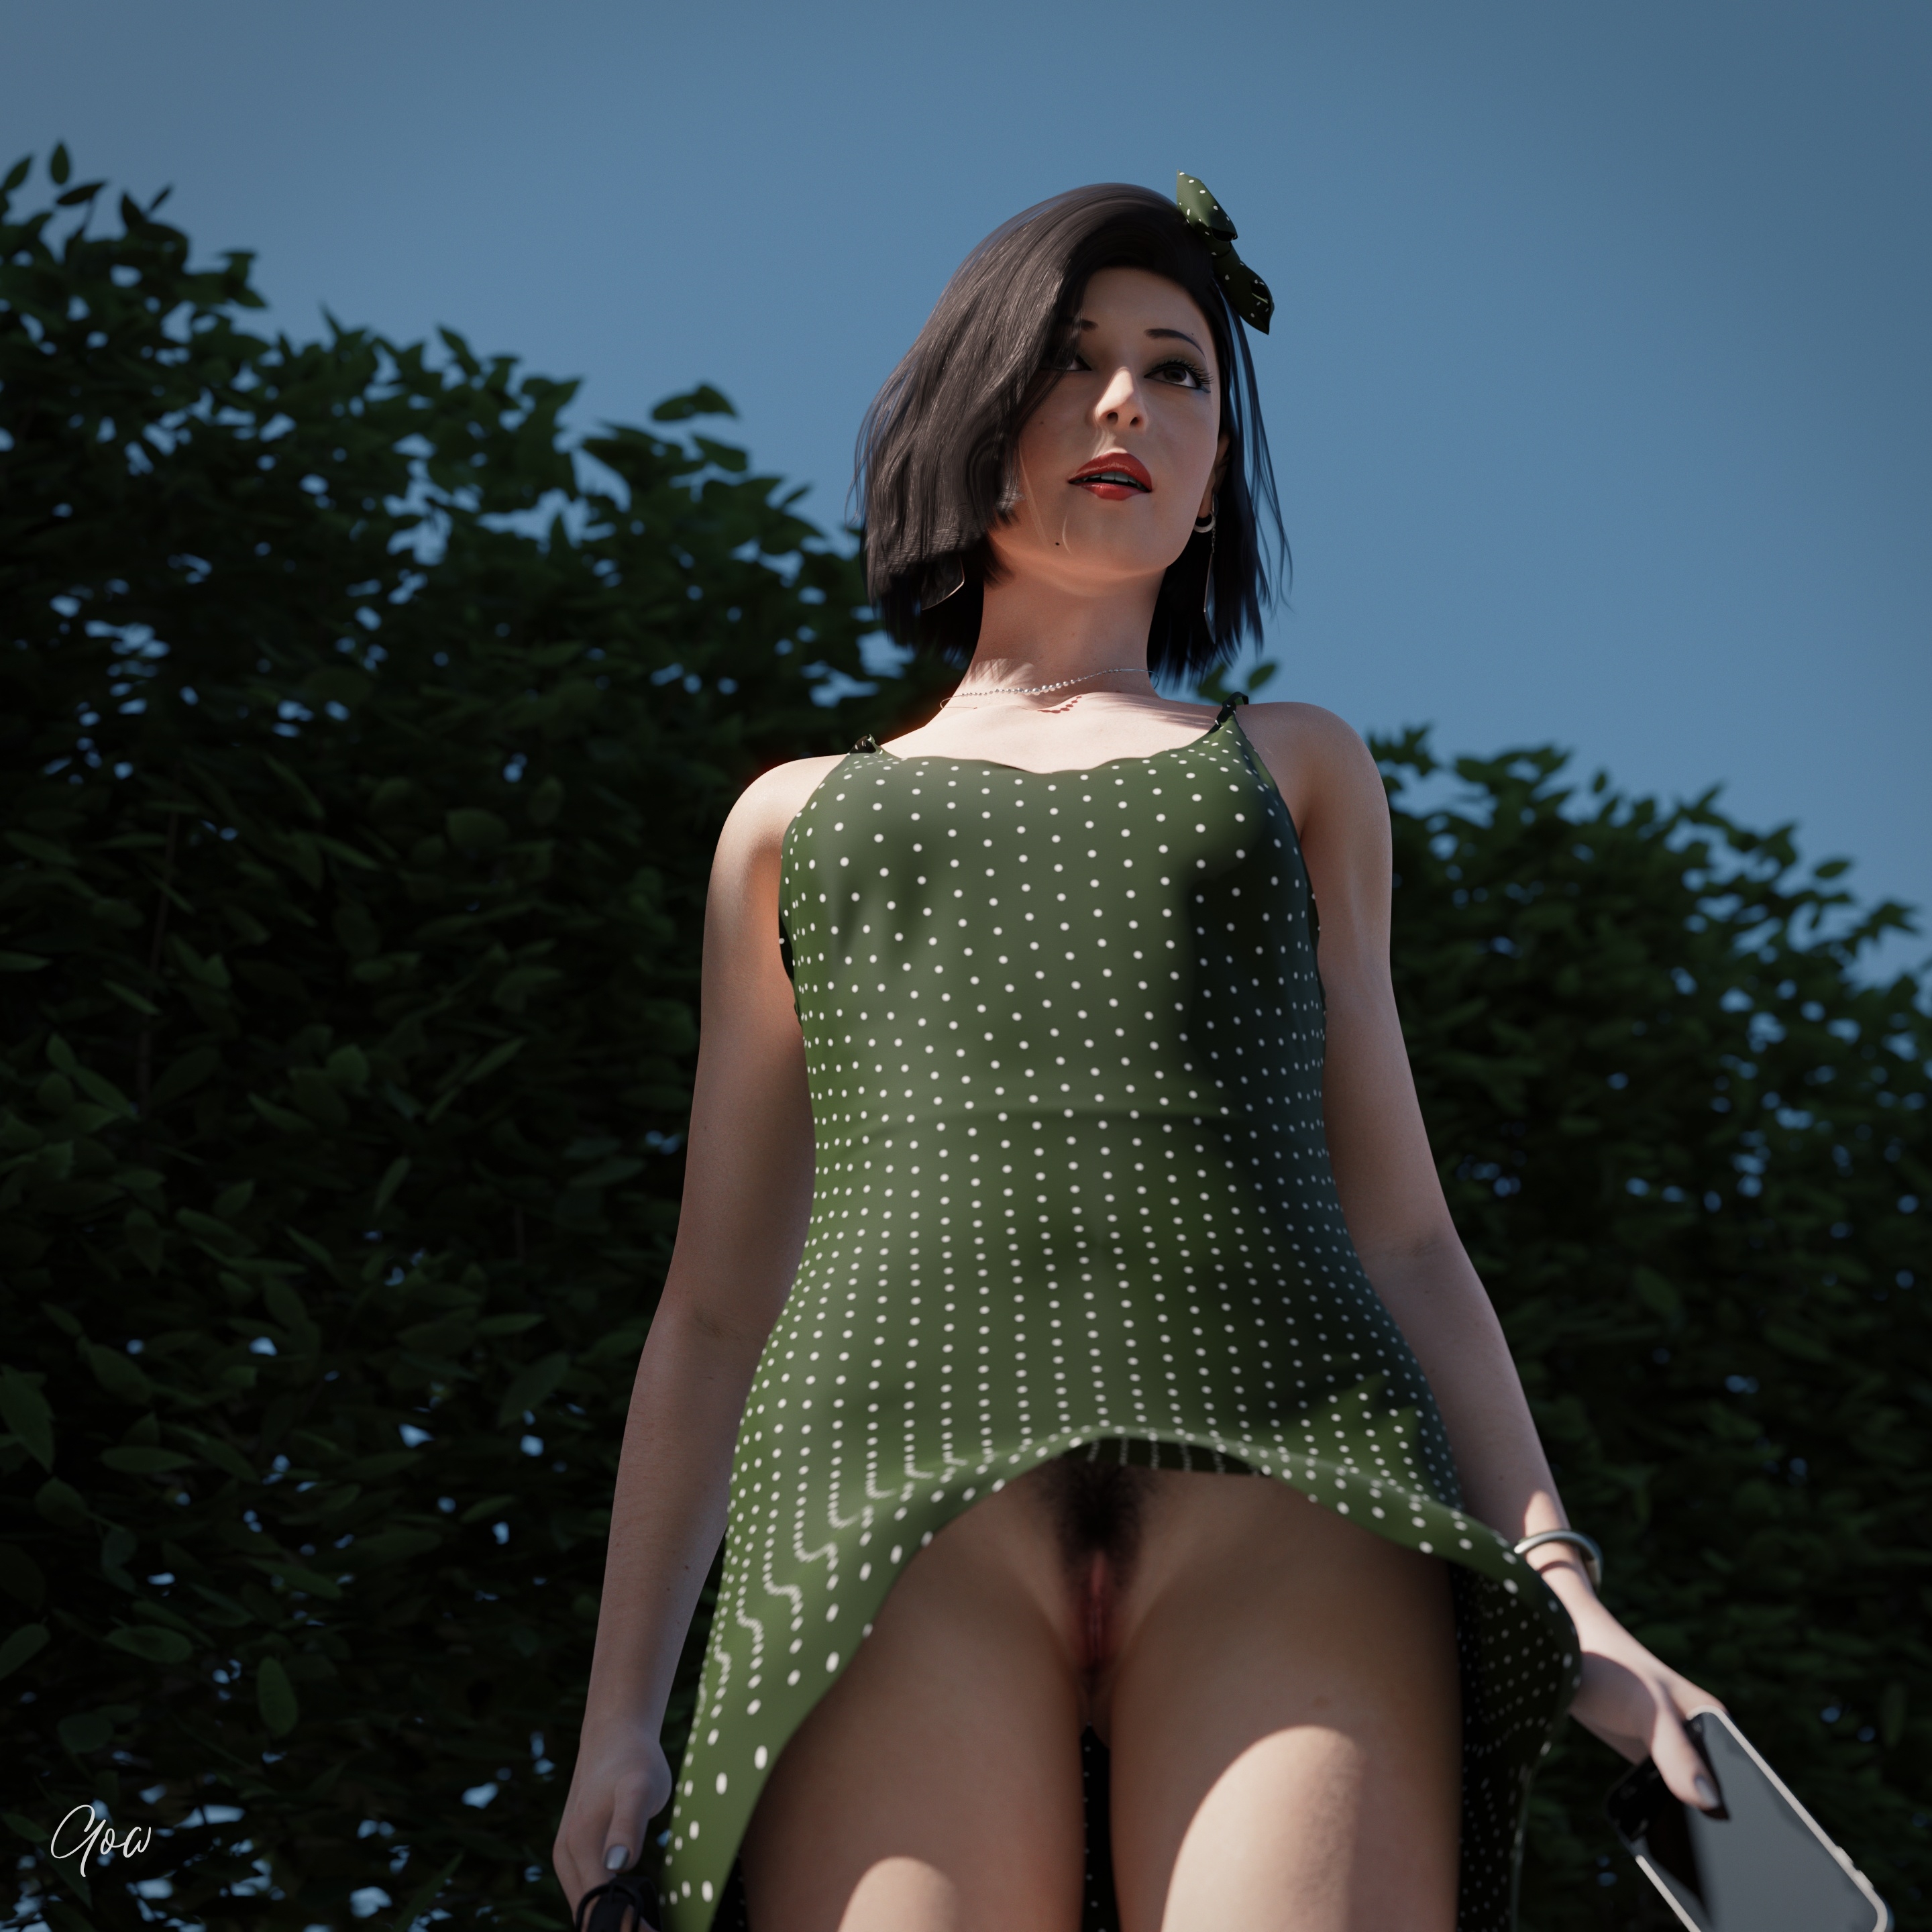 Dotted green and the wind - PT1 White Outdoor Lady Secretary Photoshoot Clothed Skirt Upskirt Pussy Wet Pussy Legs Sexy Sexyhot Photorealistic No Panties High Heels Hairy Pussy Party Dress Milf Natural Boobs Natural Tits 3